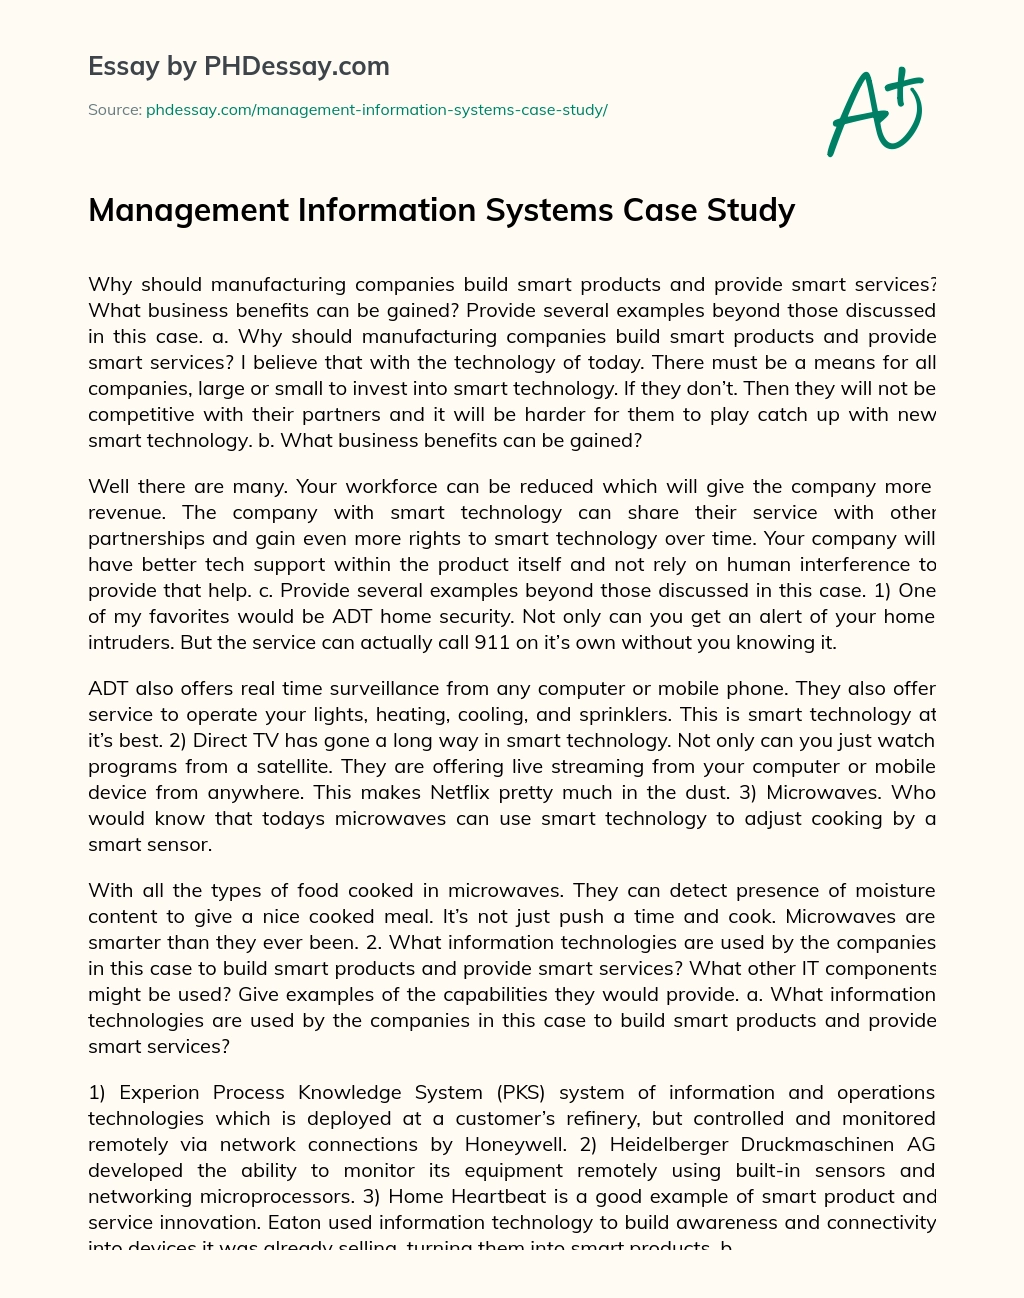 management information system case study with solution